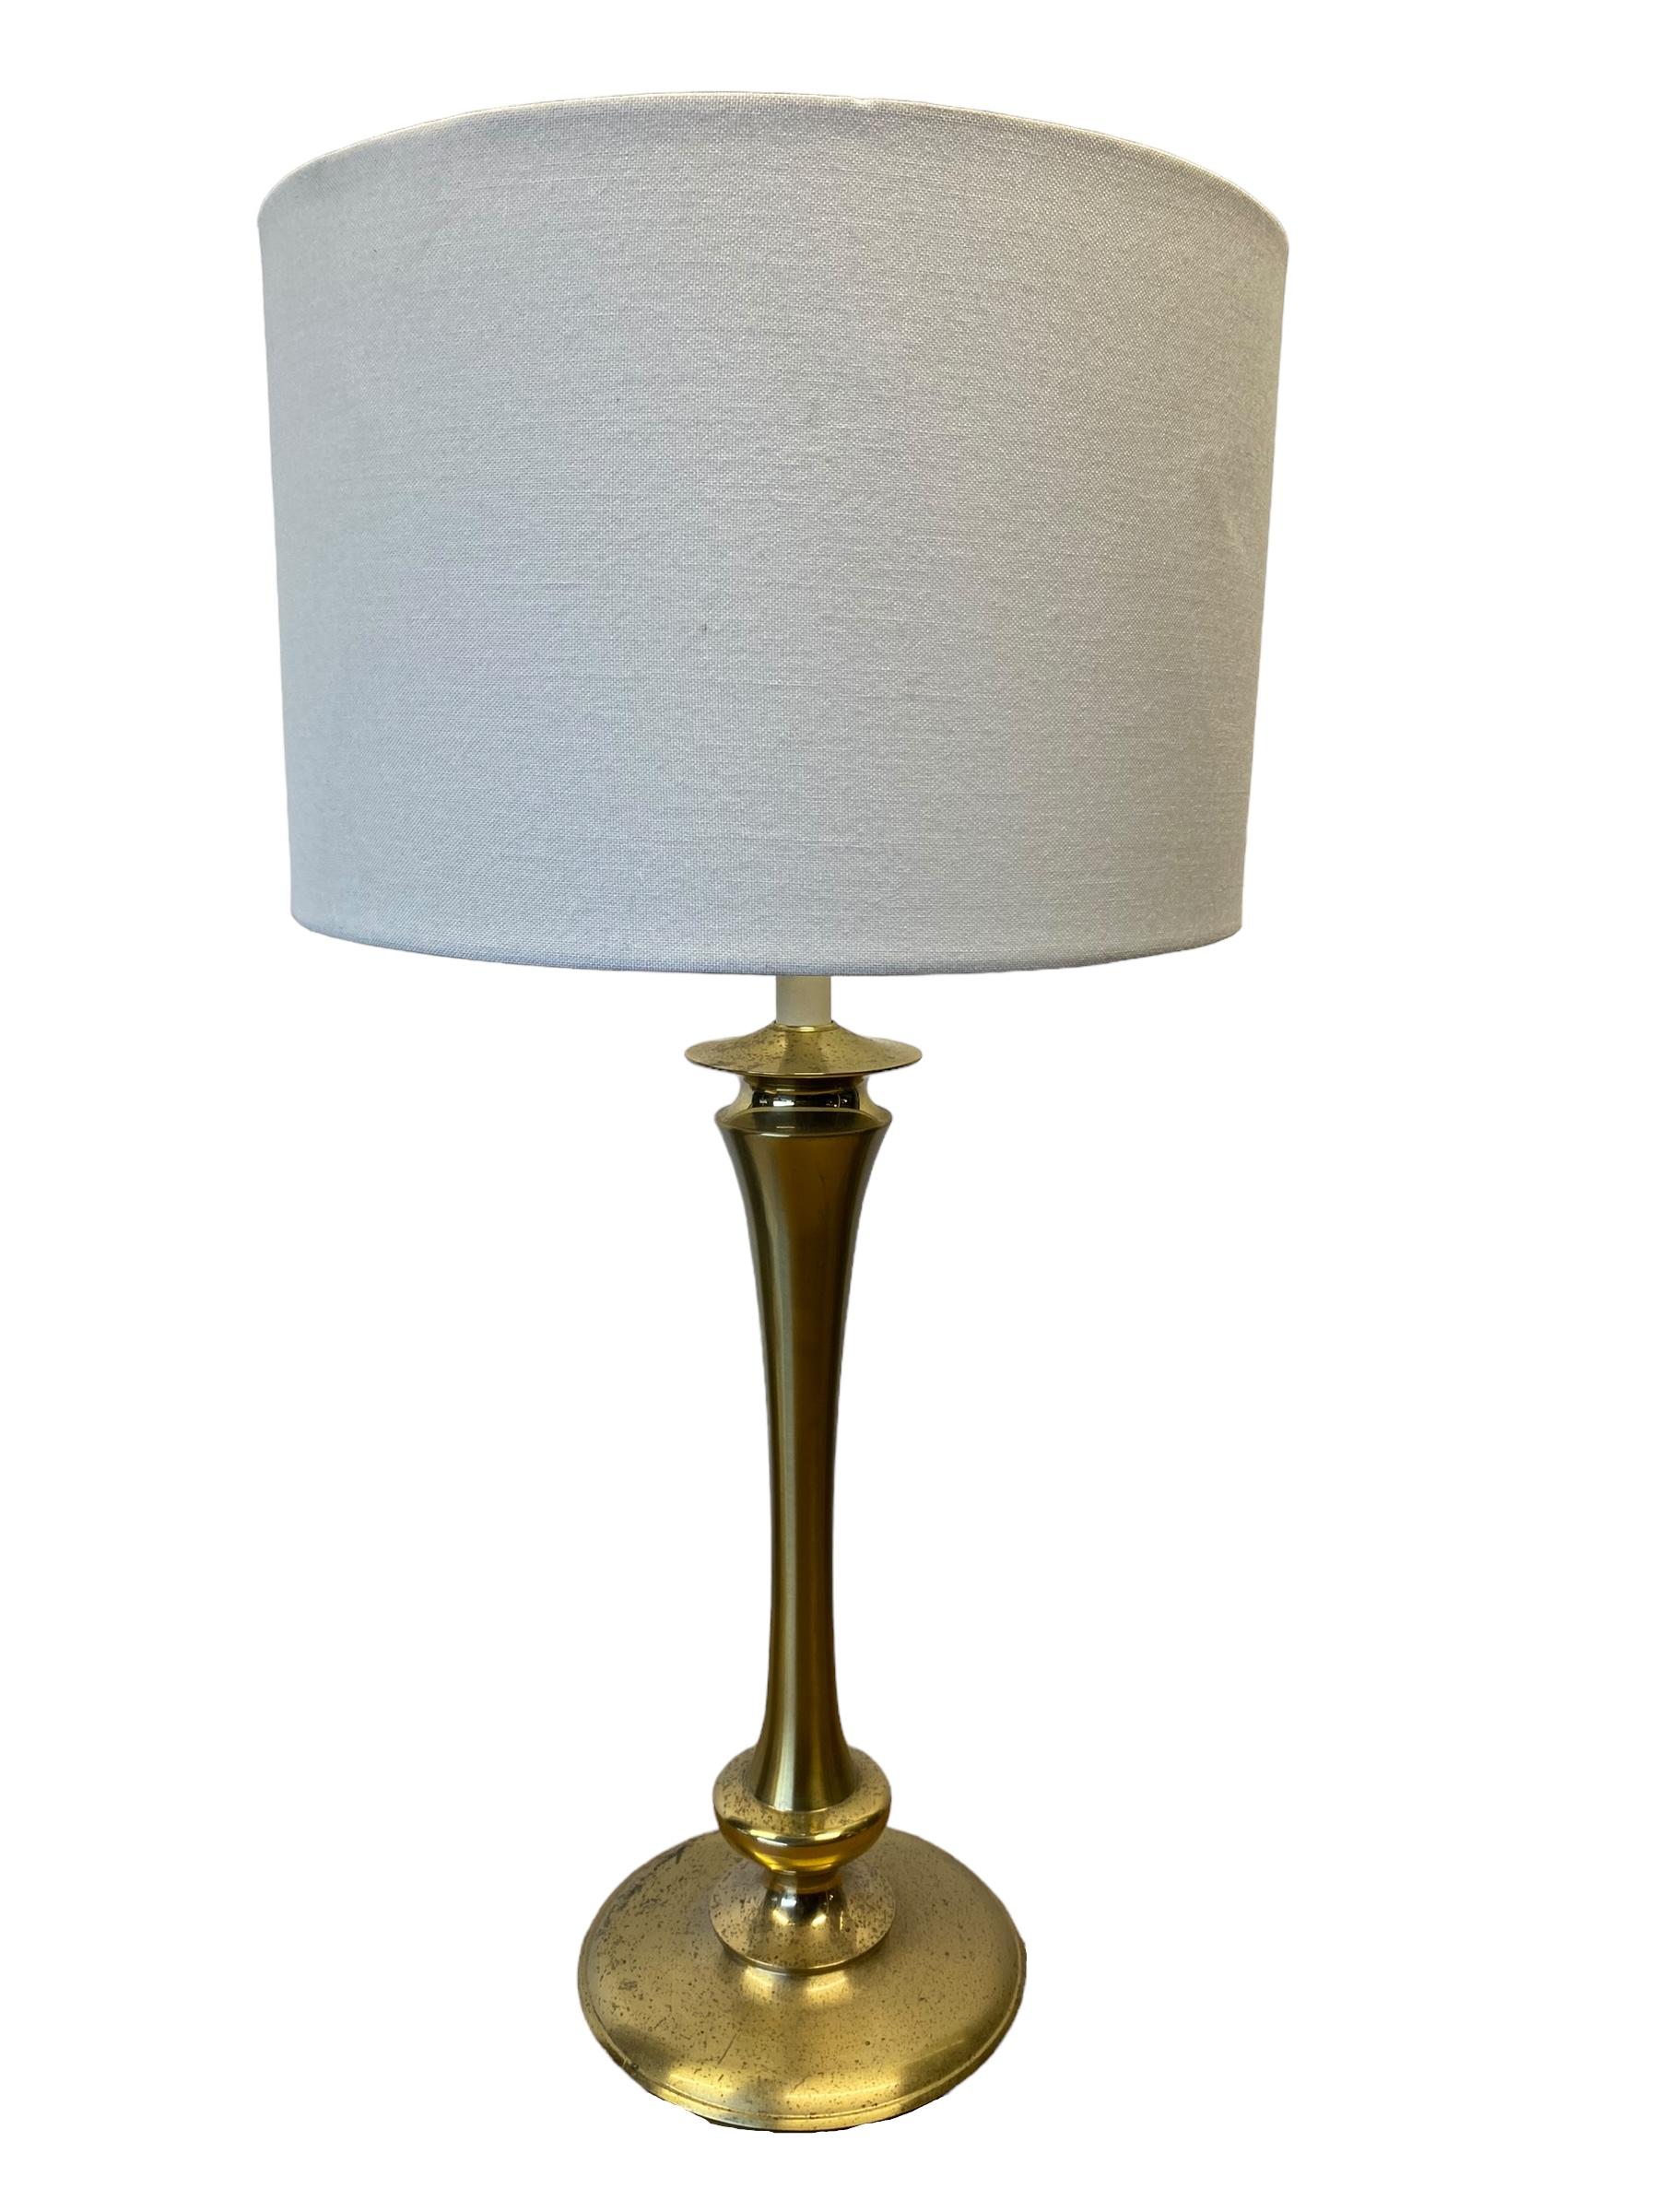 Vintage brass table lamp by Stiffel. Simple tulip form and turned base with candle stick fixture. Elegant example of mid century design. 